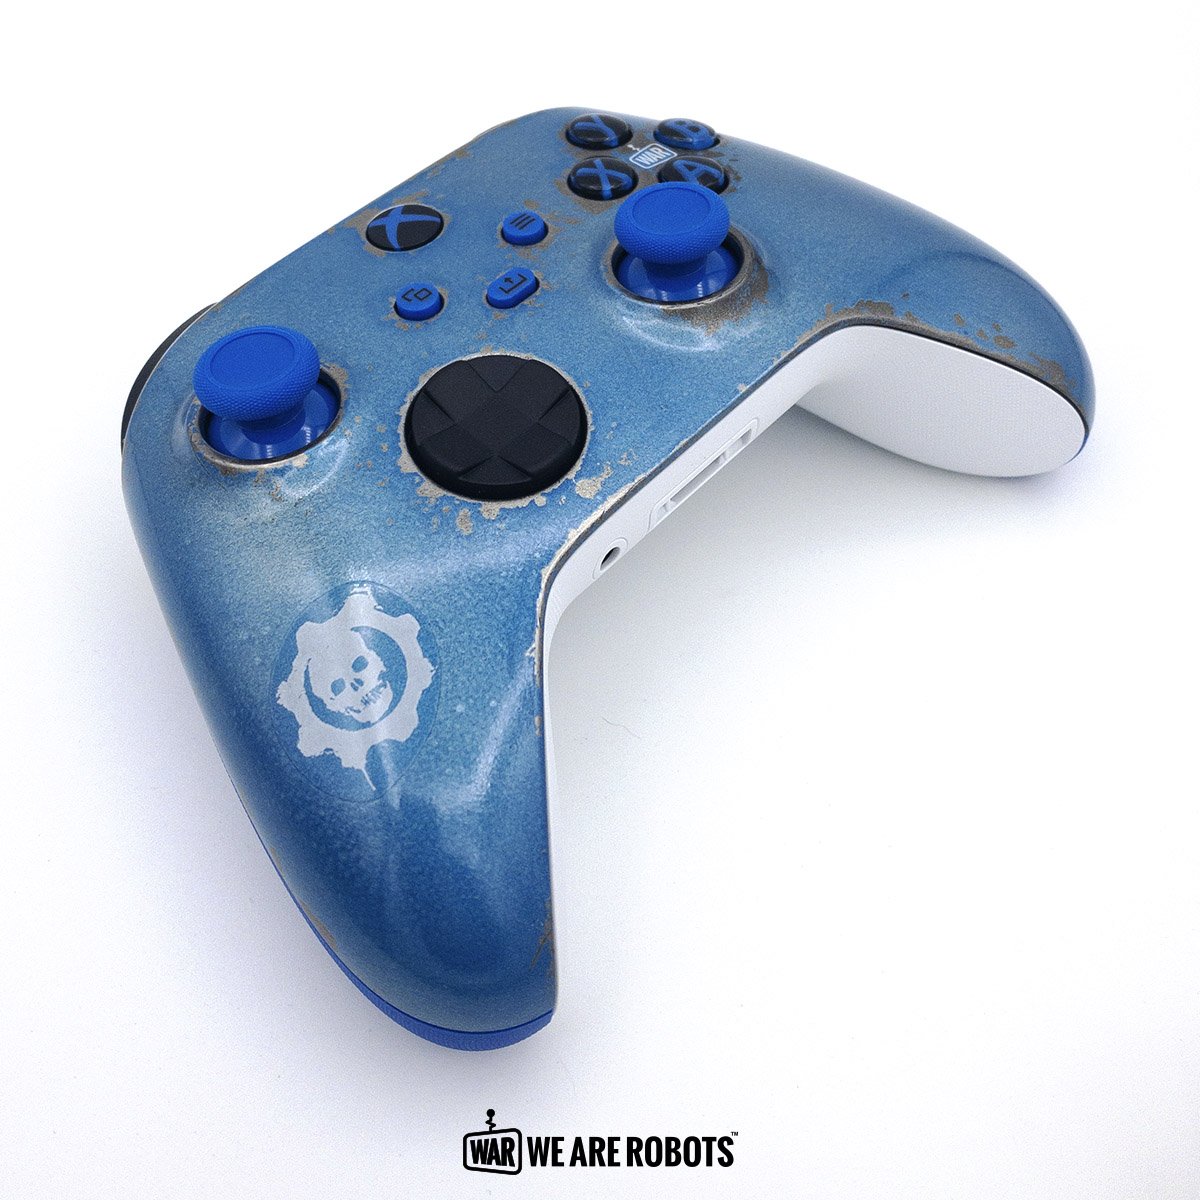 We Are Robots - Gears of War - Xbox Controller